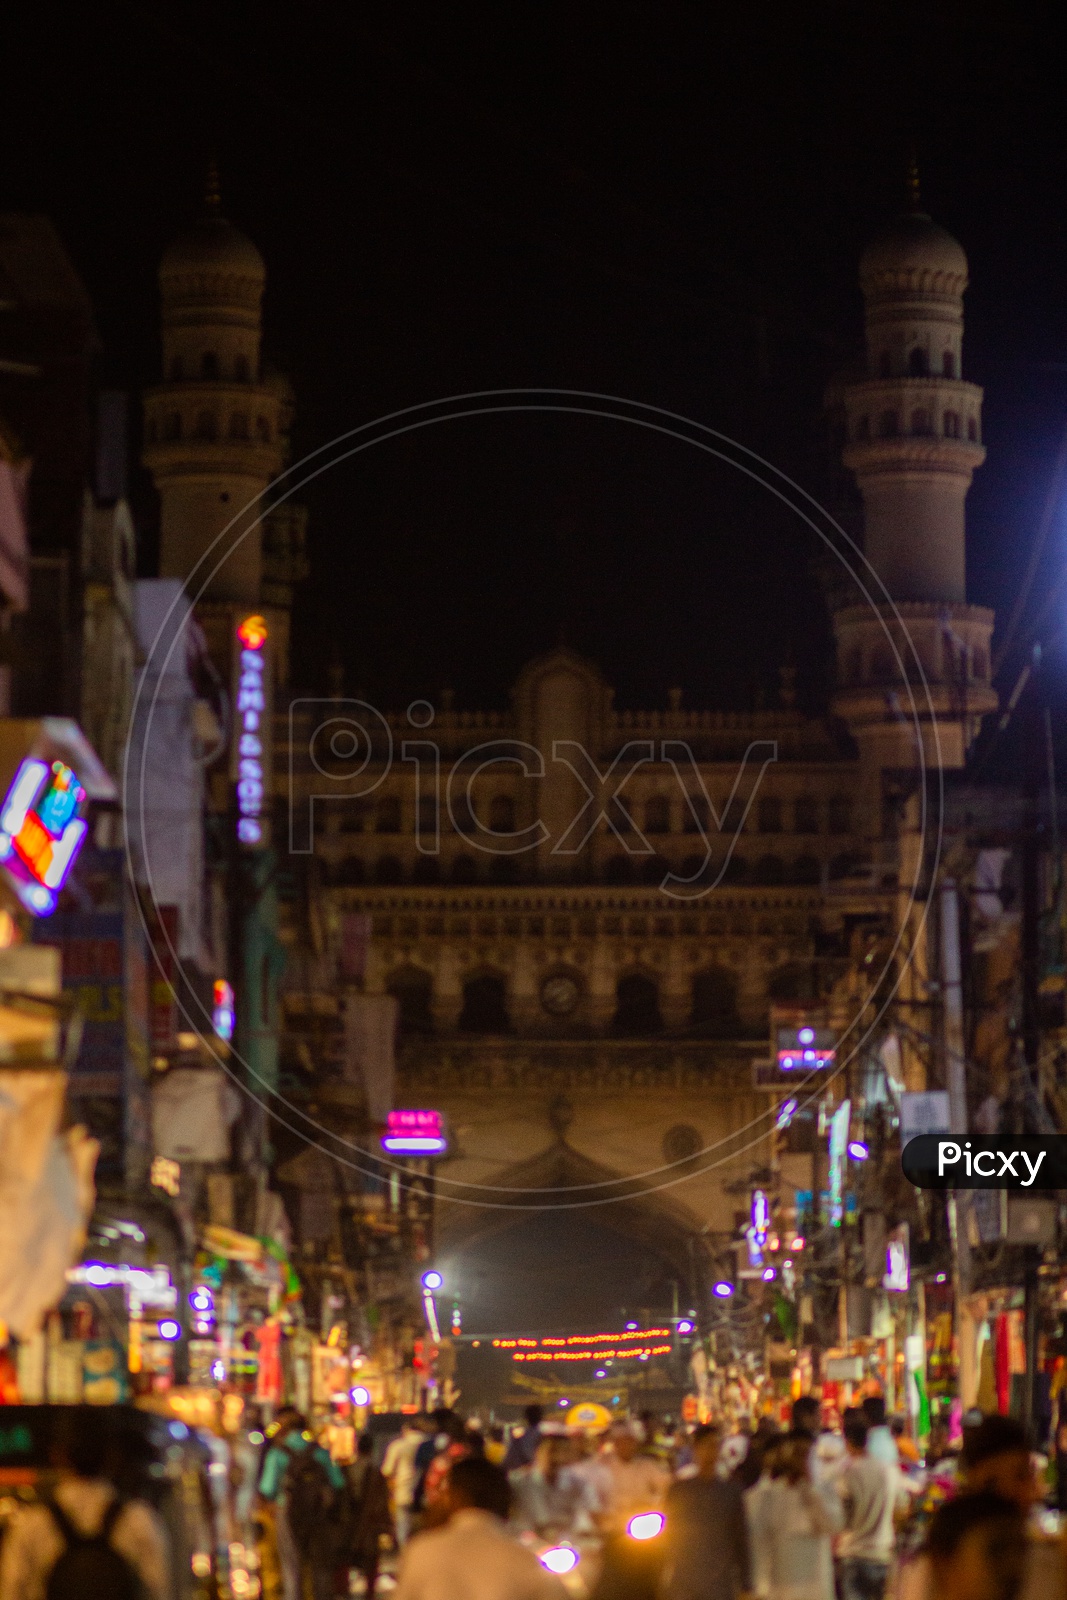 Stories from Charminar